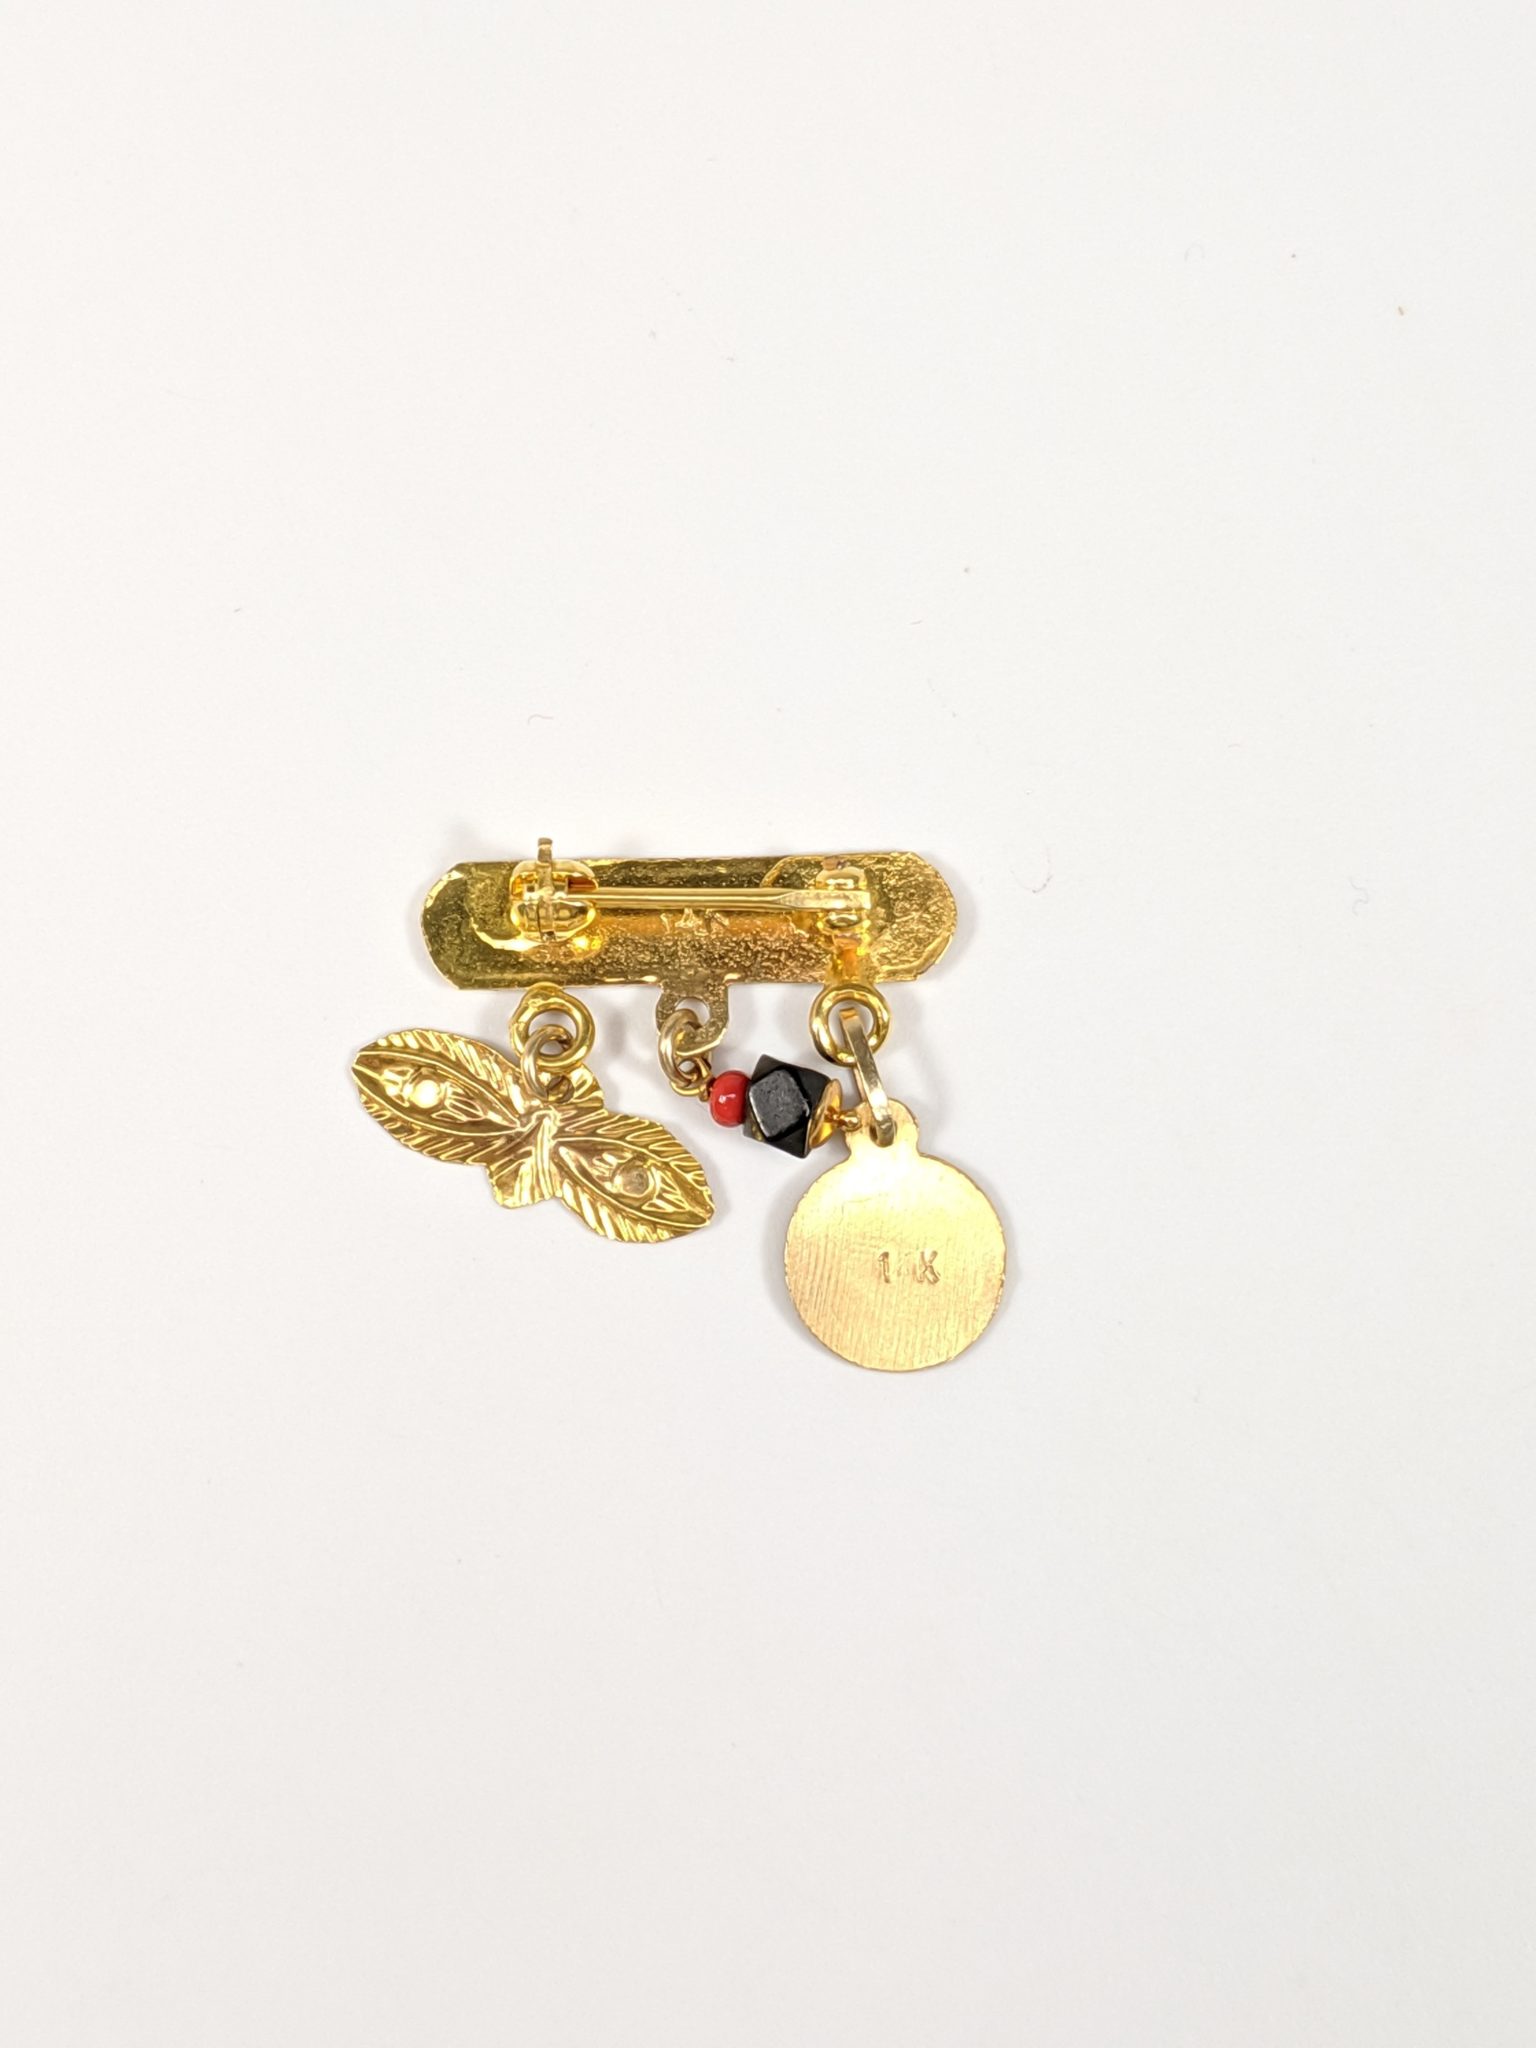 14K Yellow Gold "Dios Me Bendiga" Pin Brooch With Hanging Genuine Black Azabache Red Coral Ojos de Santa Lucia Eyes and Saint Medal Rear View